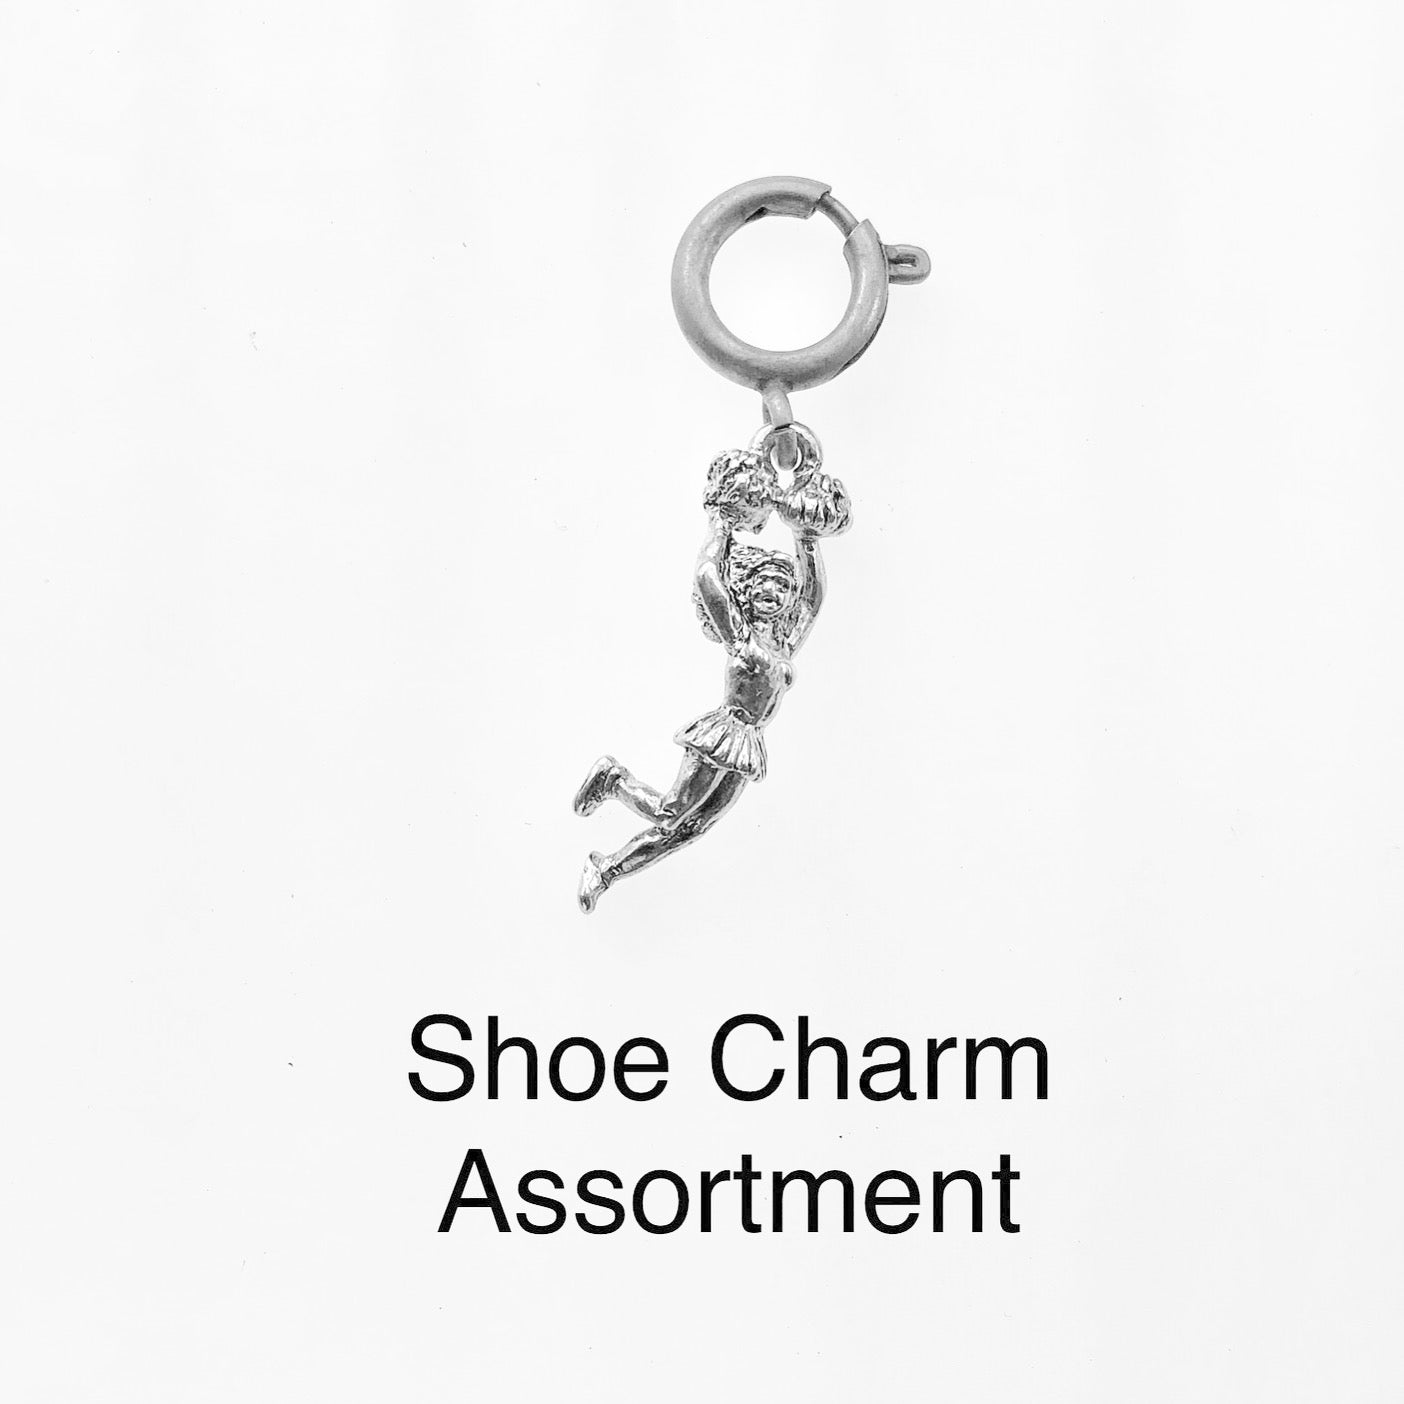 Shoe Charm Assortment - $10.00 Total Cost for Charm and Closure (This is a made to order assembly item)